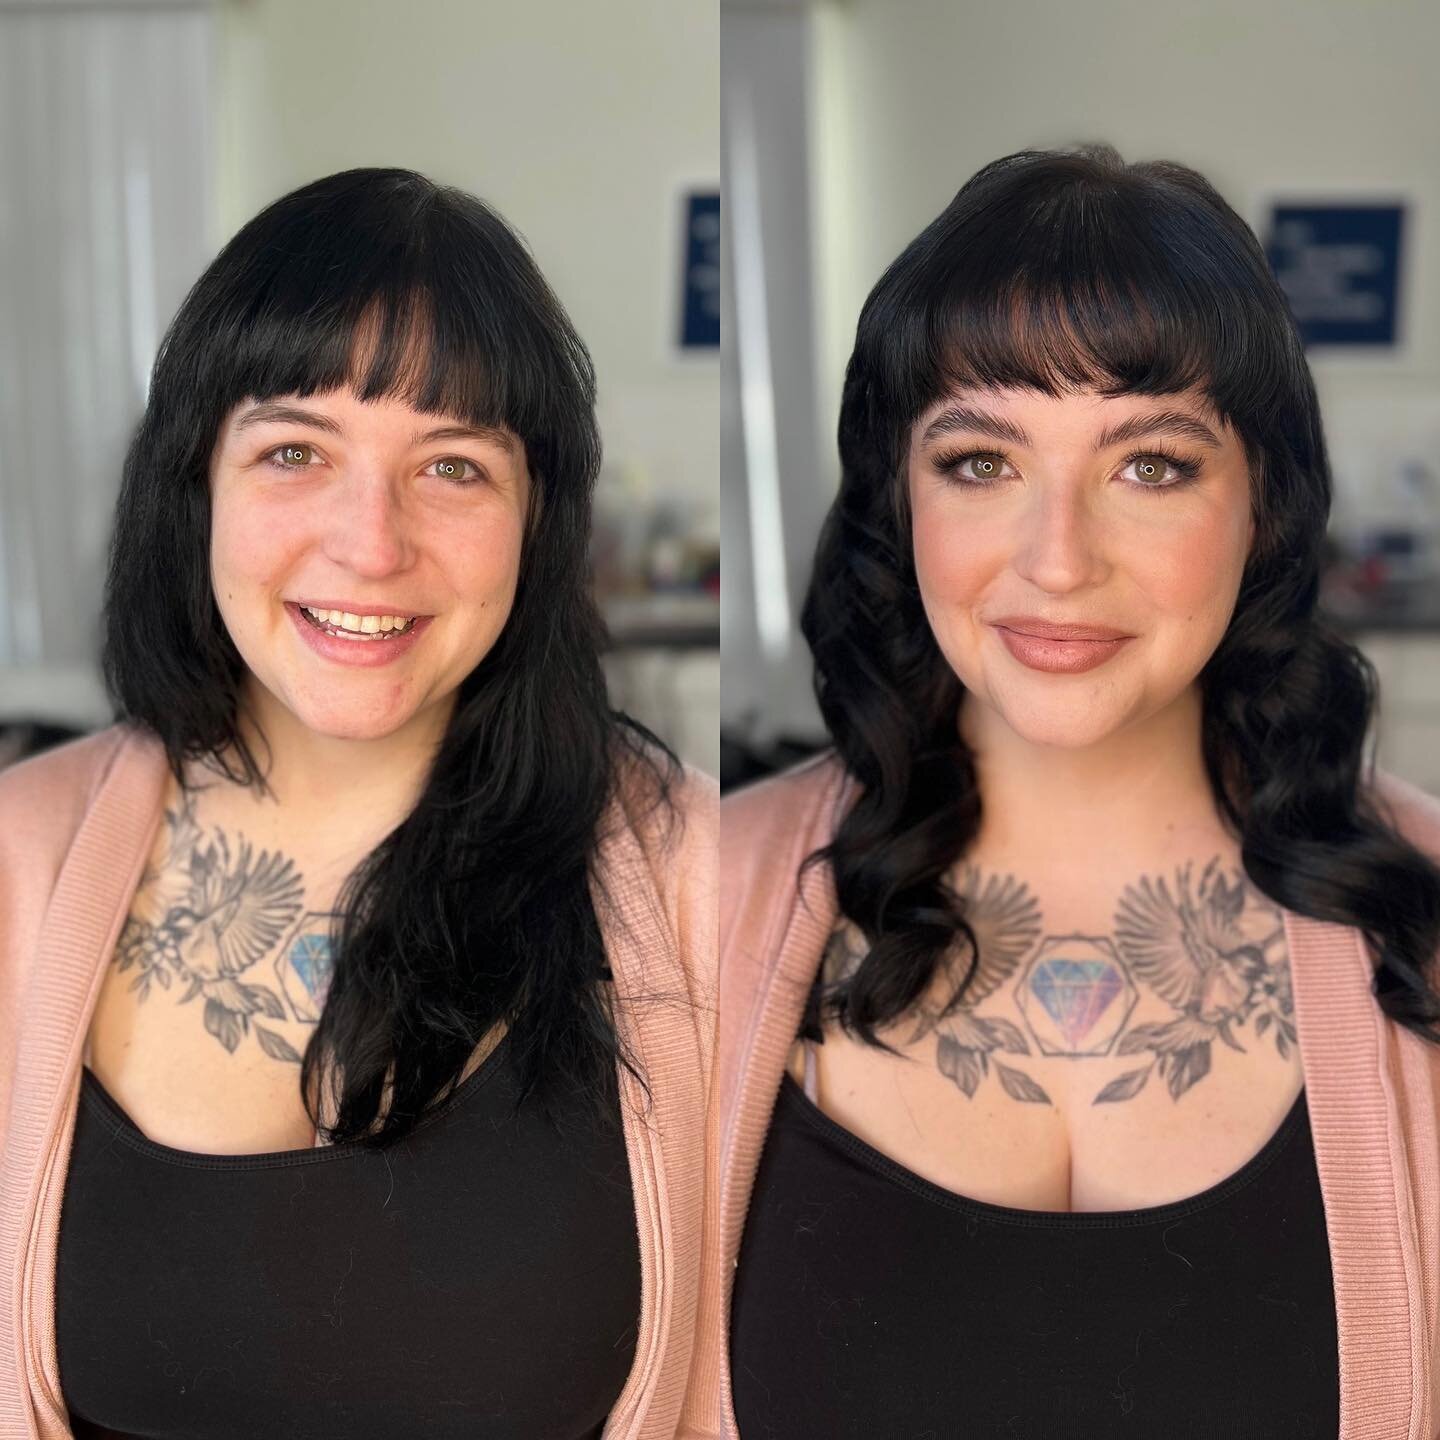 Reposting this look from yesterday to try a new layout! 💗

I&rsquo;m putting a poll in my stories to see how we feel about side-by-side photos as opposed to single photos. I like side-by-sides because I think it&rsquo;s nice to come to my page and s